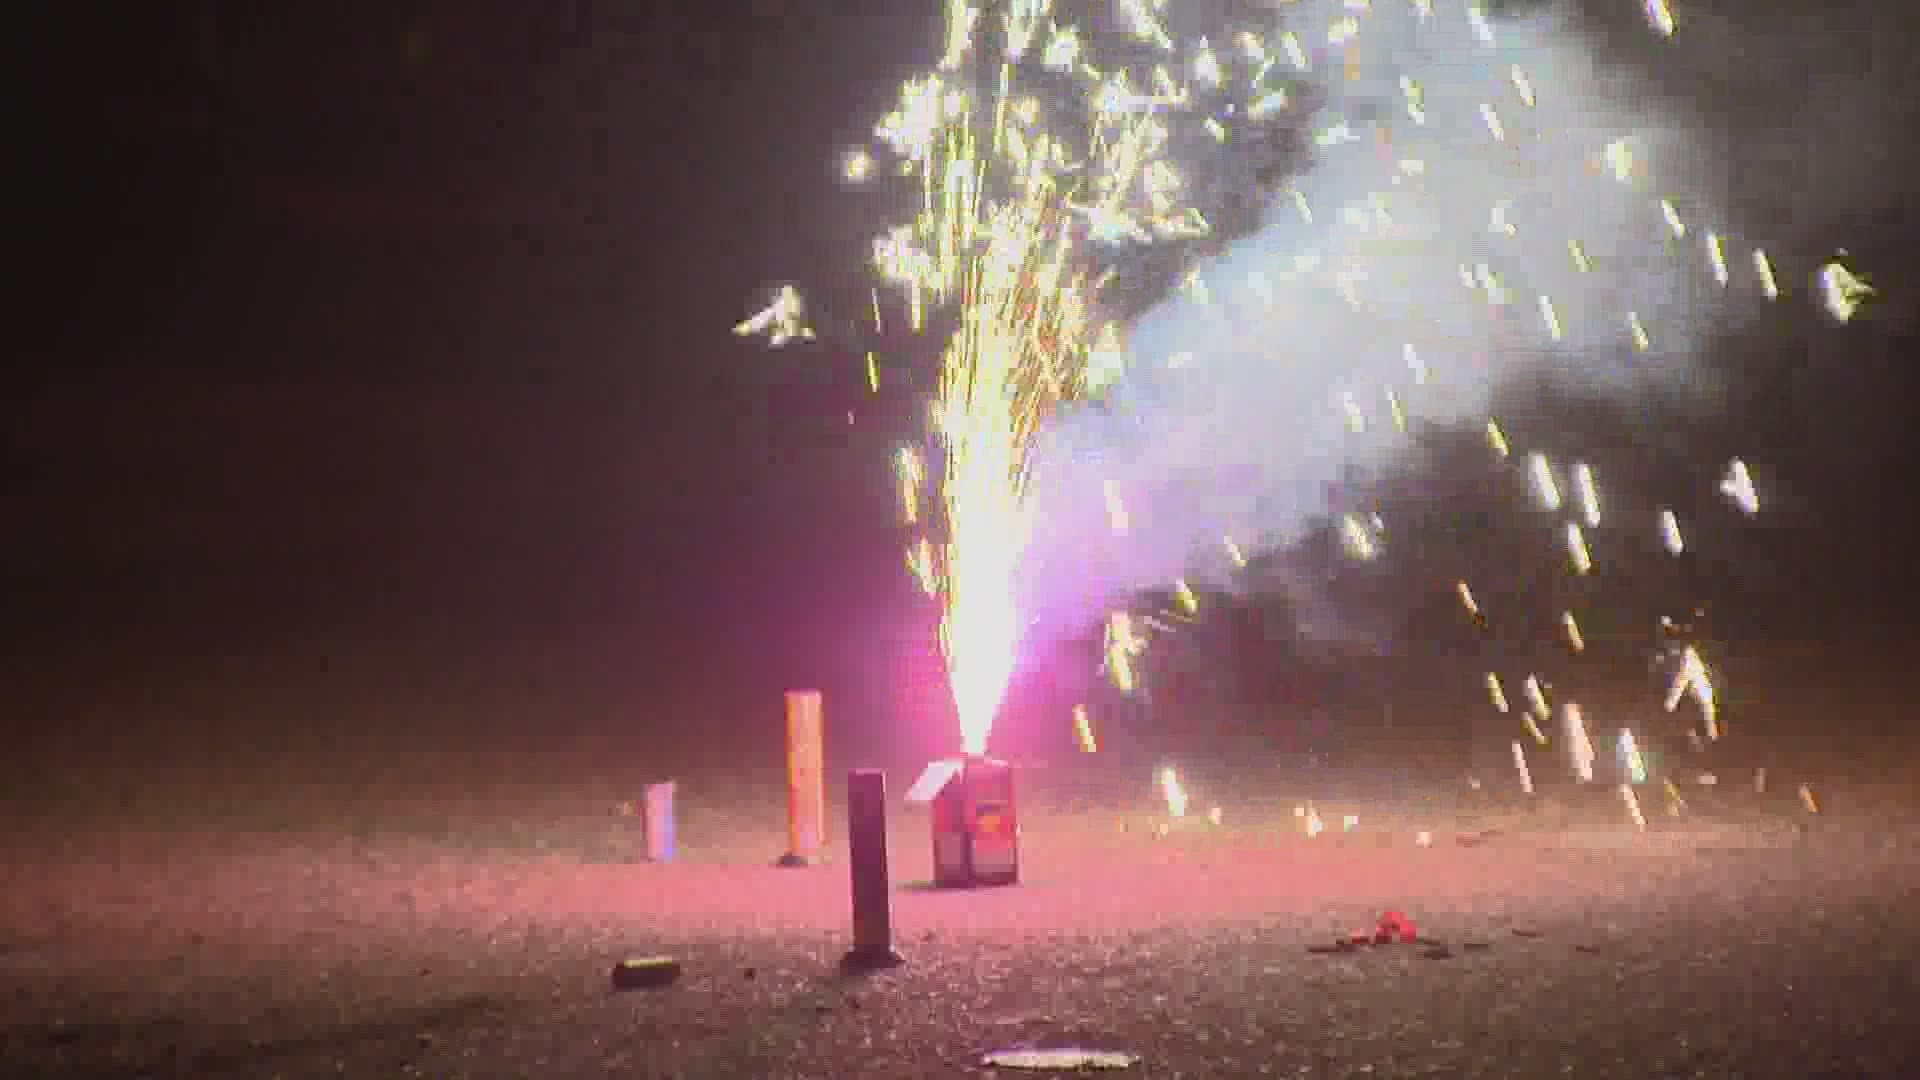 How to stay safe when lighting consumer fireworks during hot, dry weather.